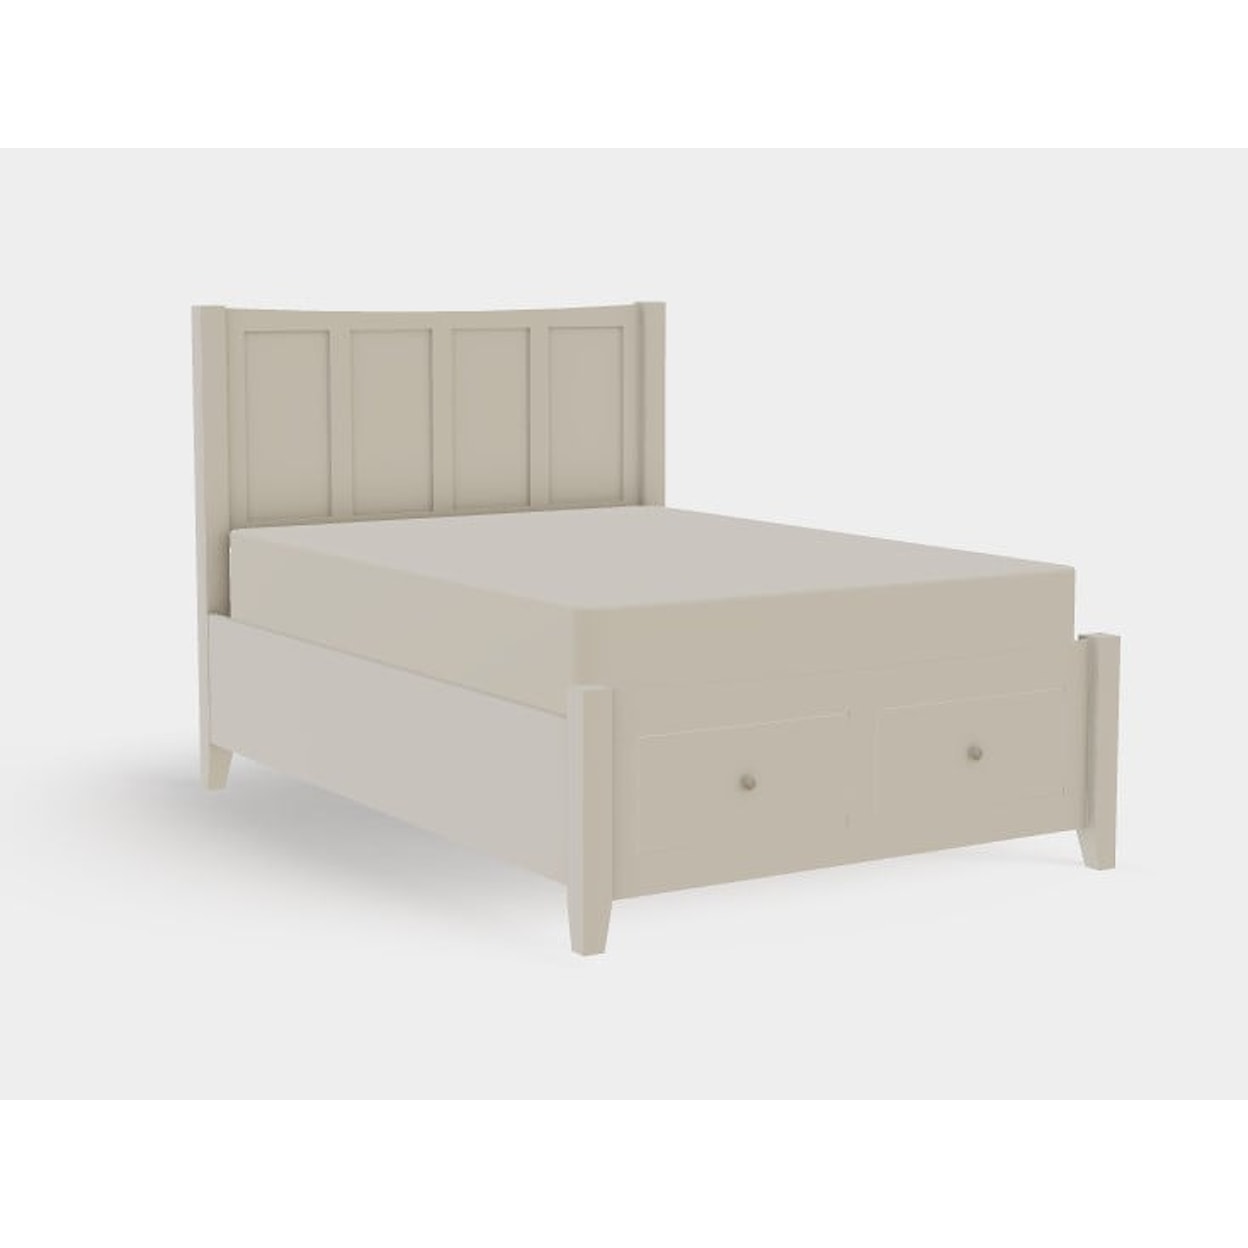 Mavin Atwood Group Atwood Full Footboard Storage Panel Bed